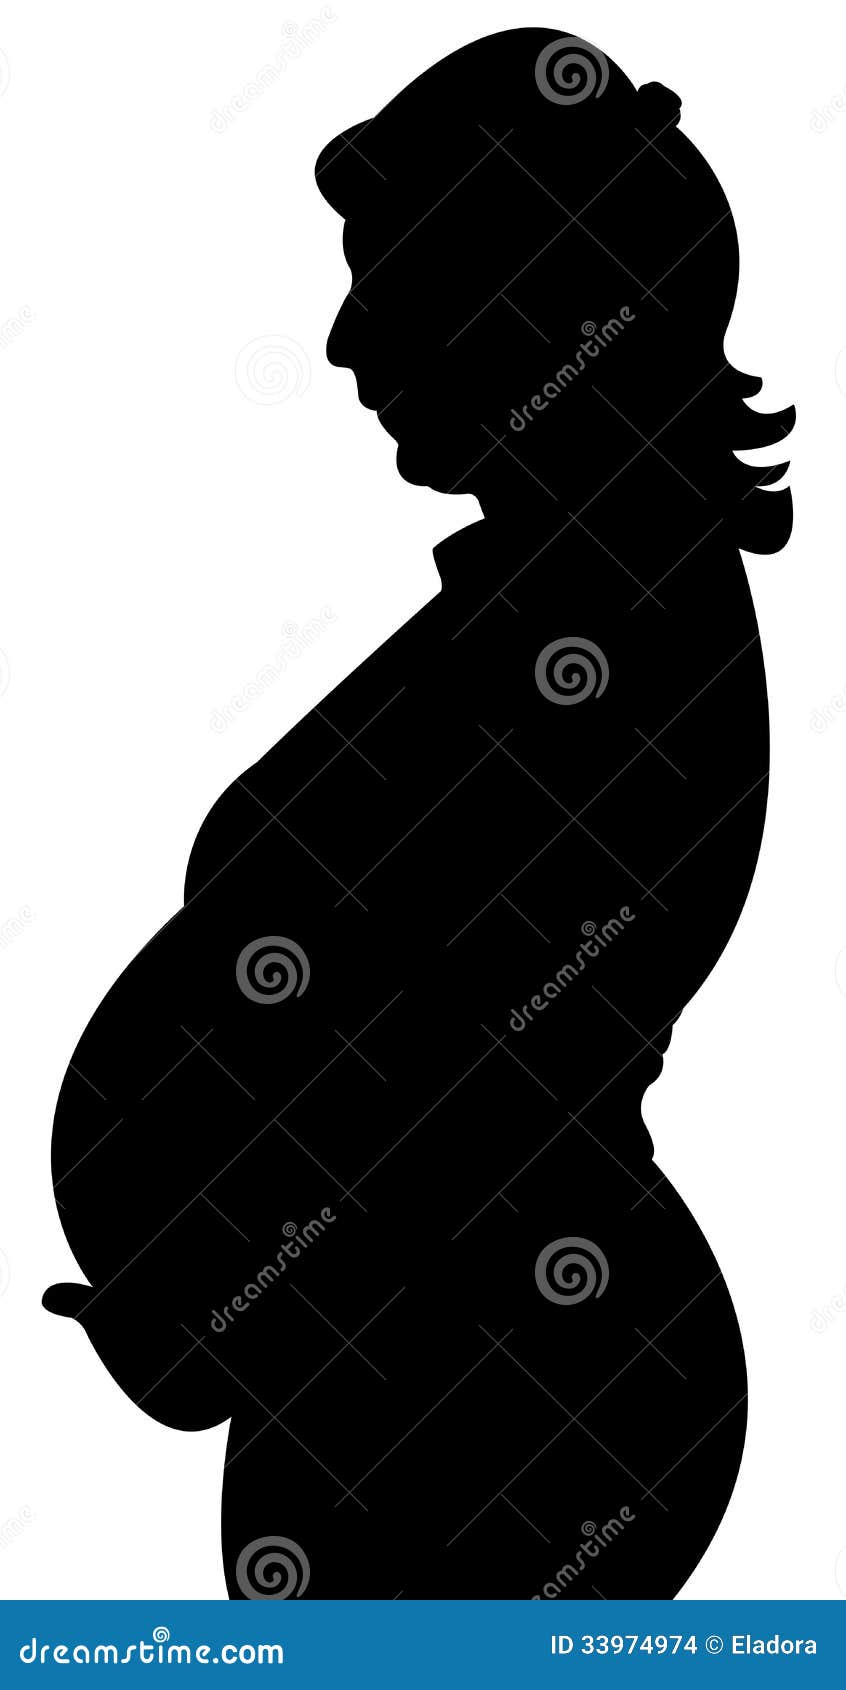 Download Silhouette Of The Pregnant Woman Stock Vector ...